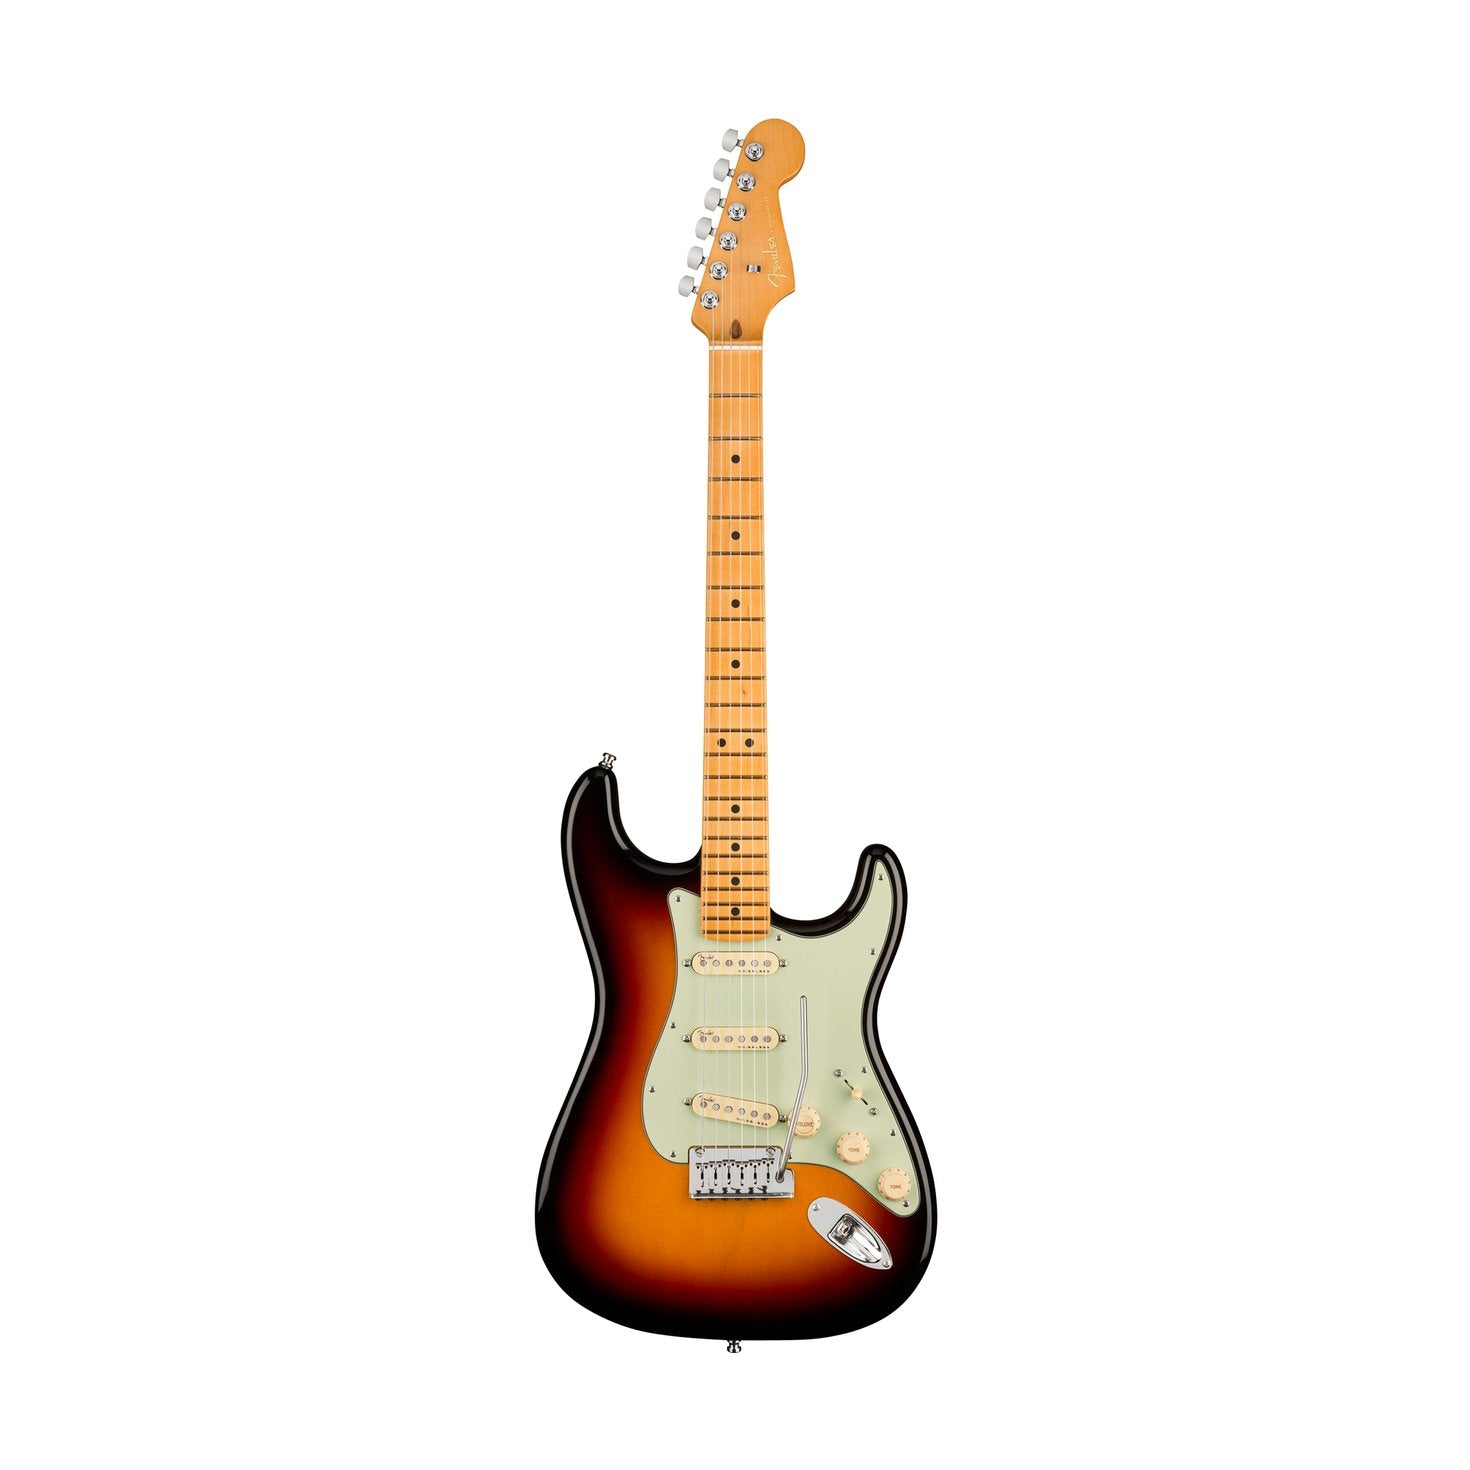 Fender American Ultra Stratocaster Electric Guitar, Maple FB, Ultraburst, FENDER, ELECTRIC GUITAR, fender-electric-guitar-f03-011-8012-712, ZOSO MUSIC SDN BHD